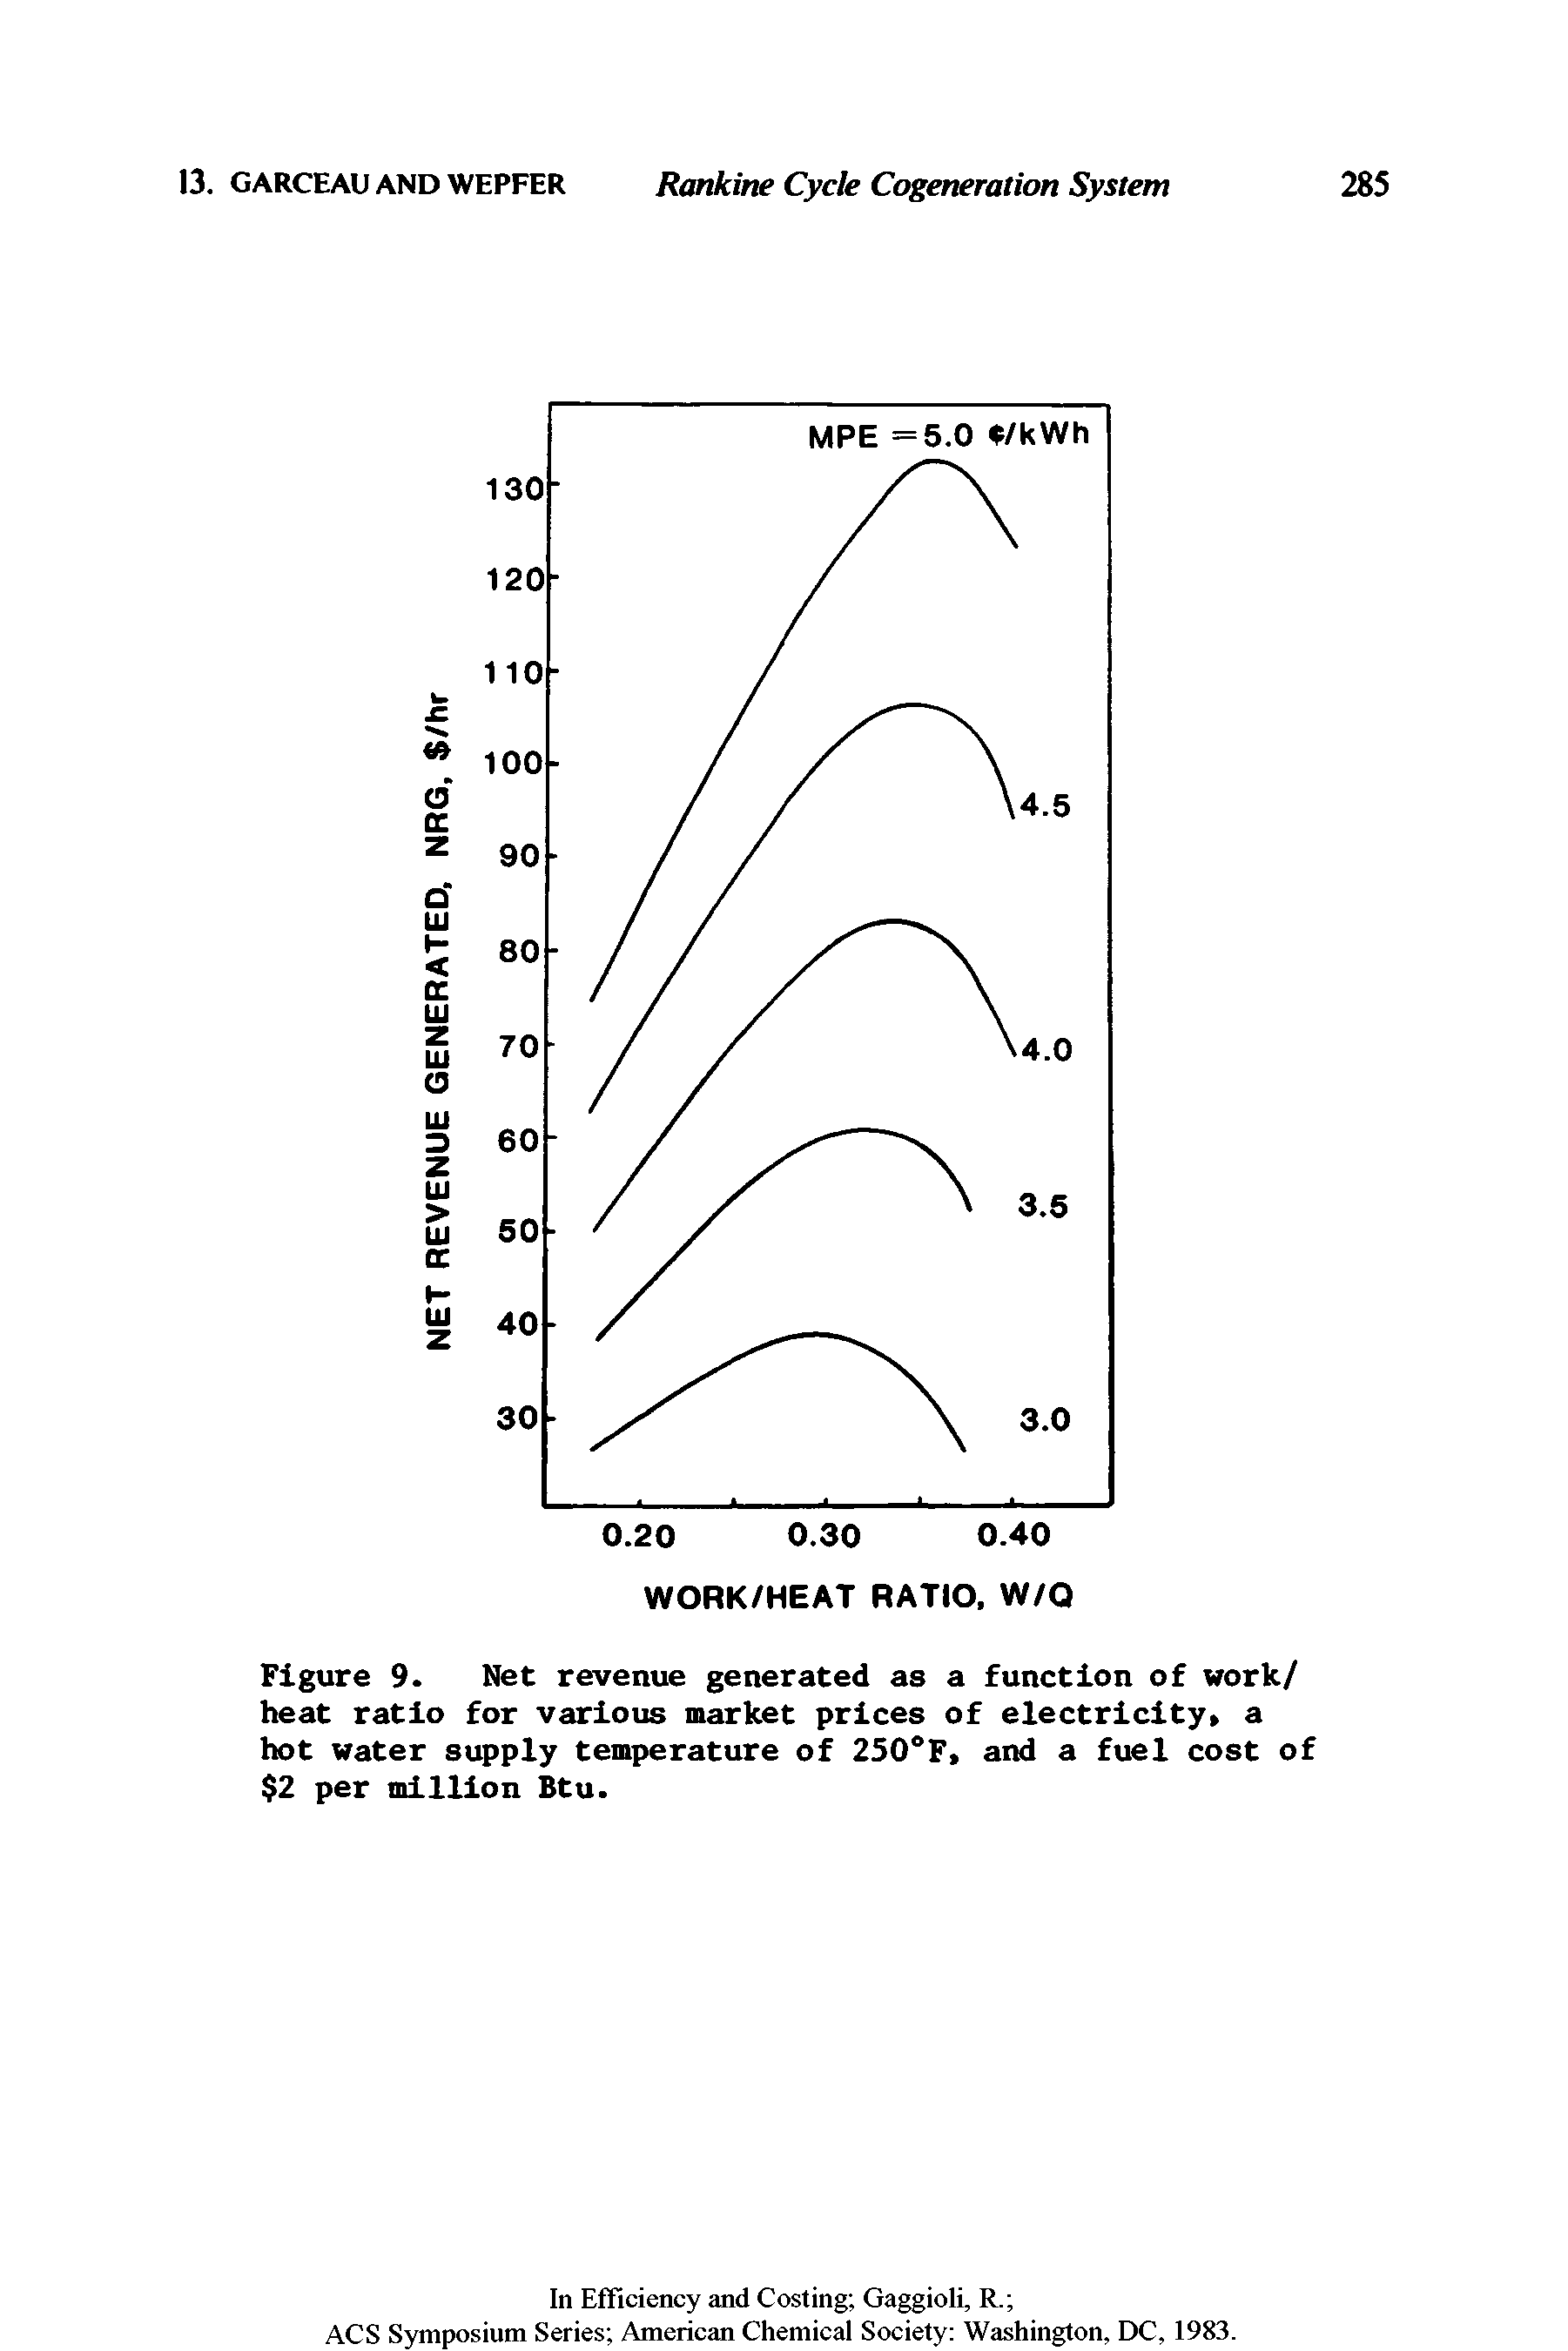 Figure 9. Net revenue generated as a function of work/ heat ratio for various market prices of electricity a hot water supply temperature of 250°F> and a fuel cost of 2 per million Btu.